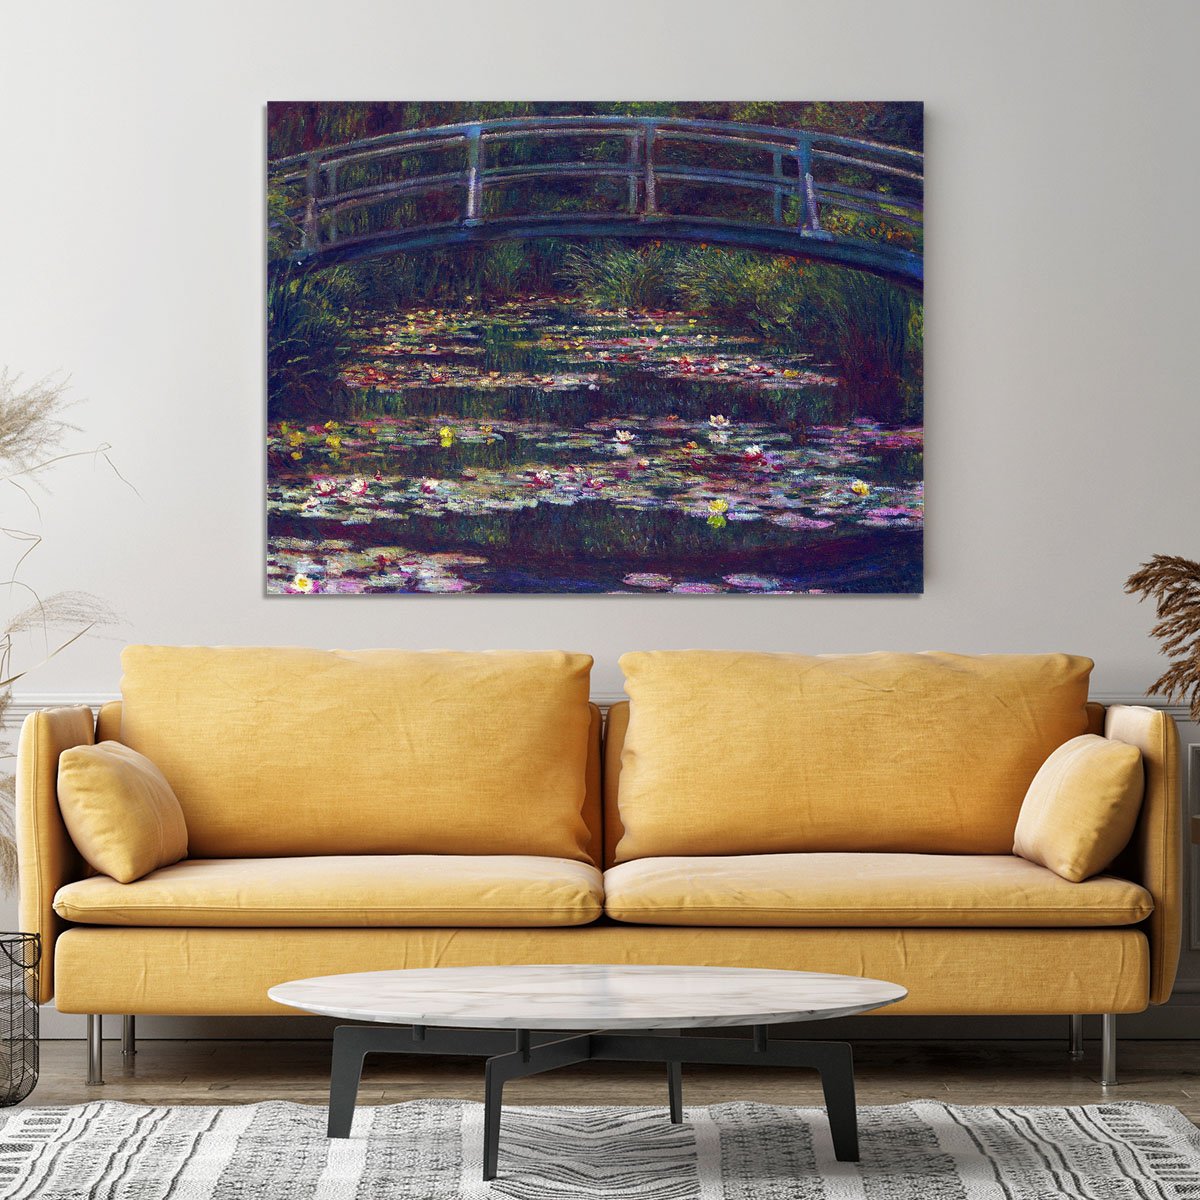 Water Lily Pond 5 by Monet Canvas Print or Poster